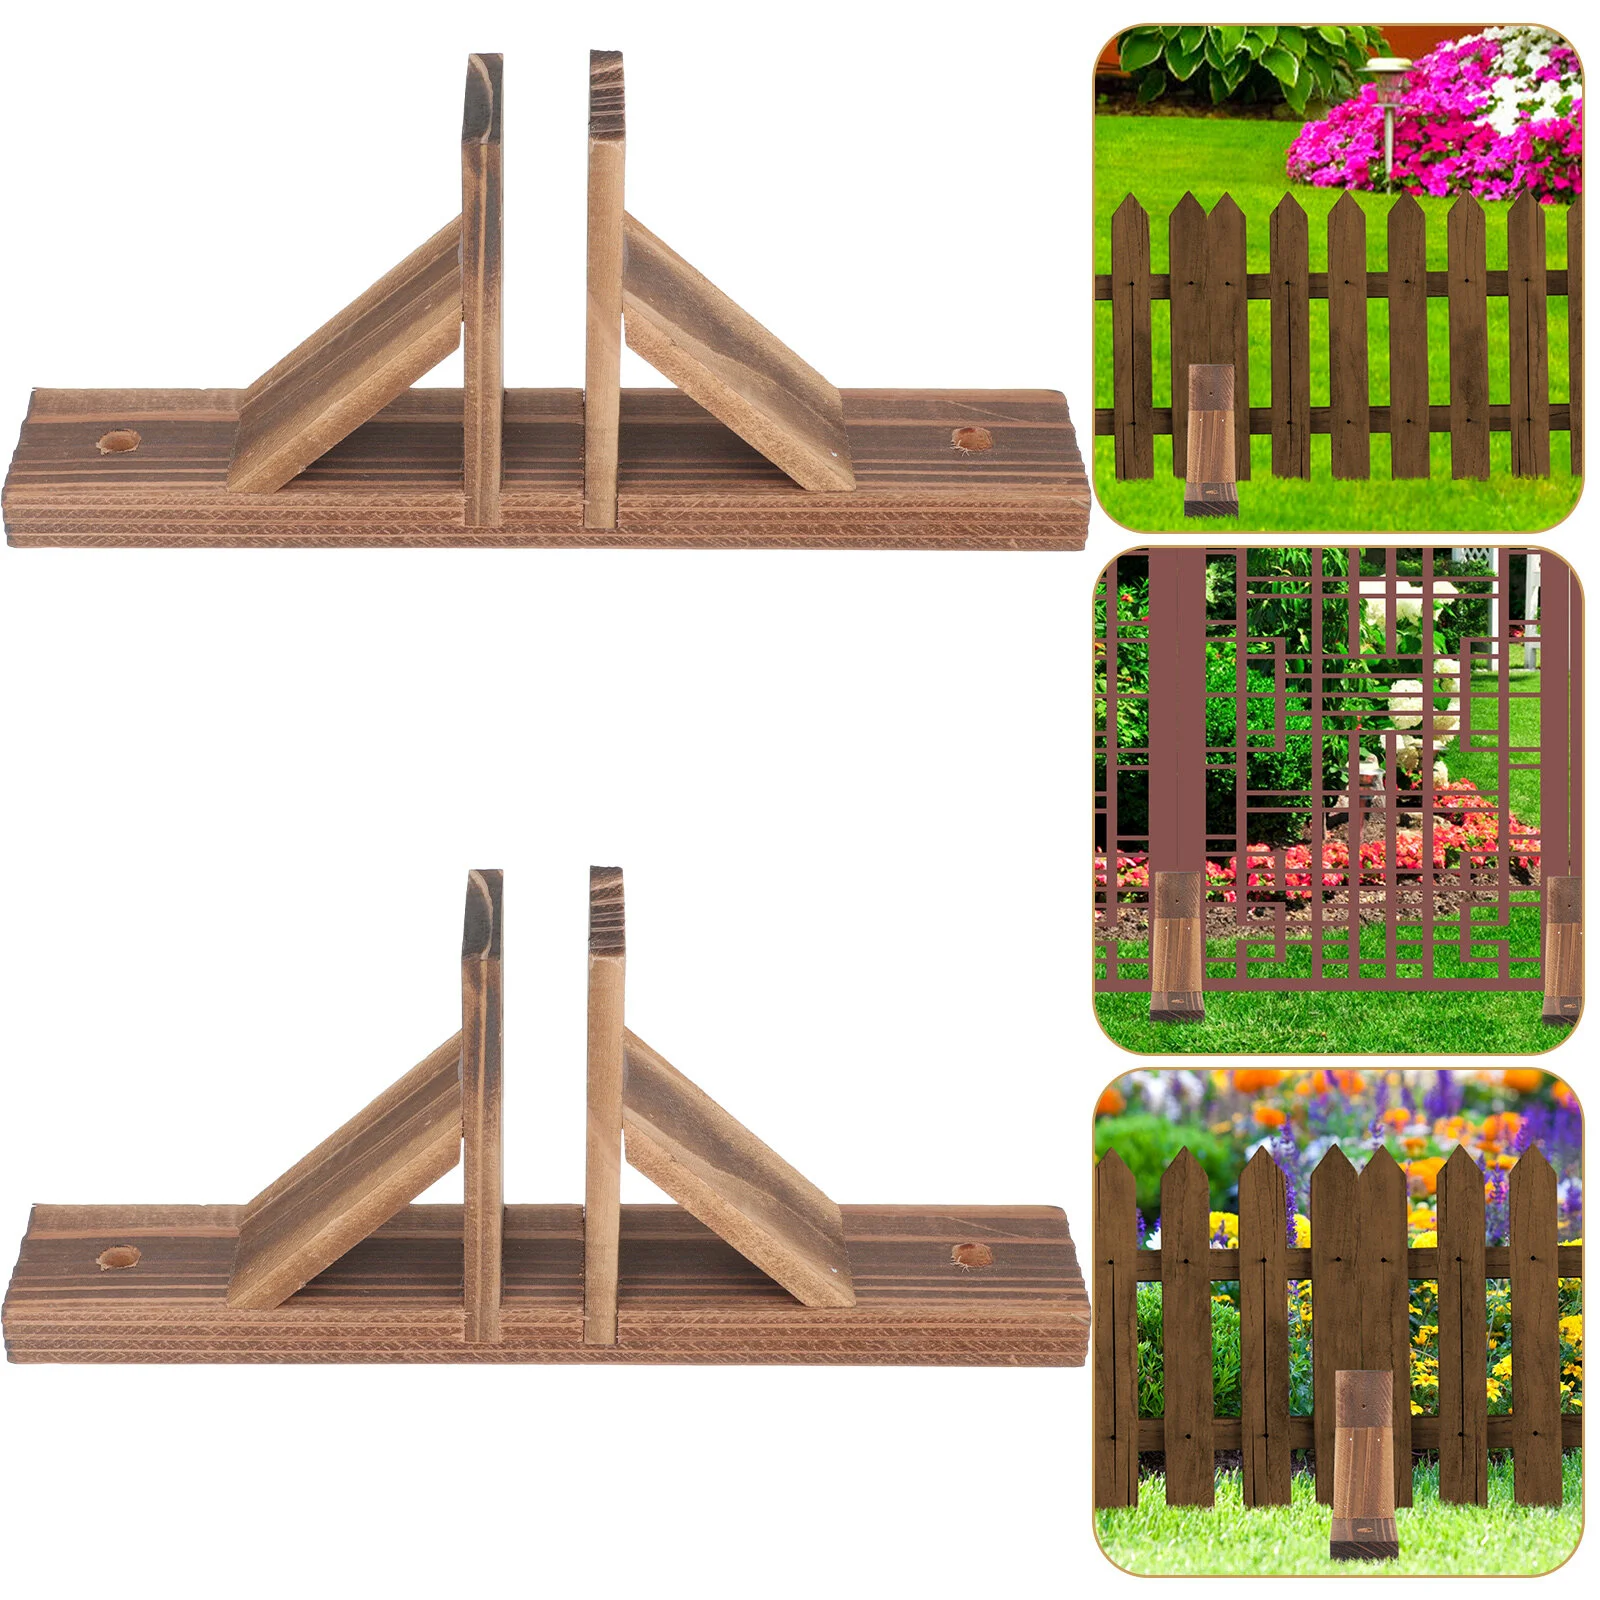 Fence Board Yard Stand Holder Practical Part Fences Base Kit Supply Garden Accessory Pet Enclosure